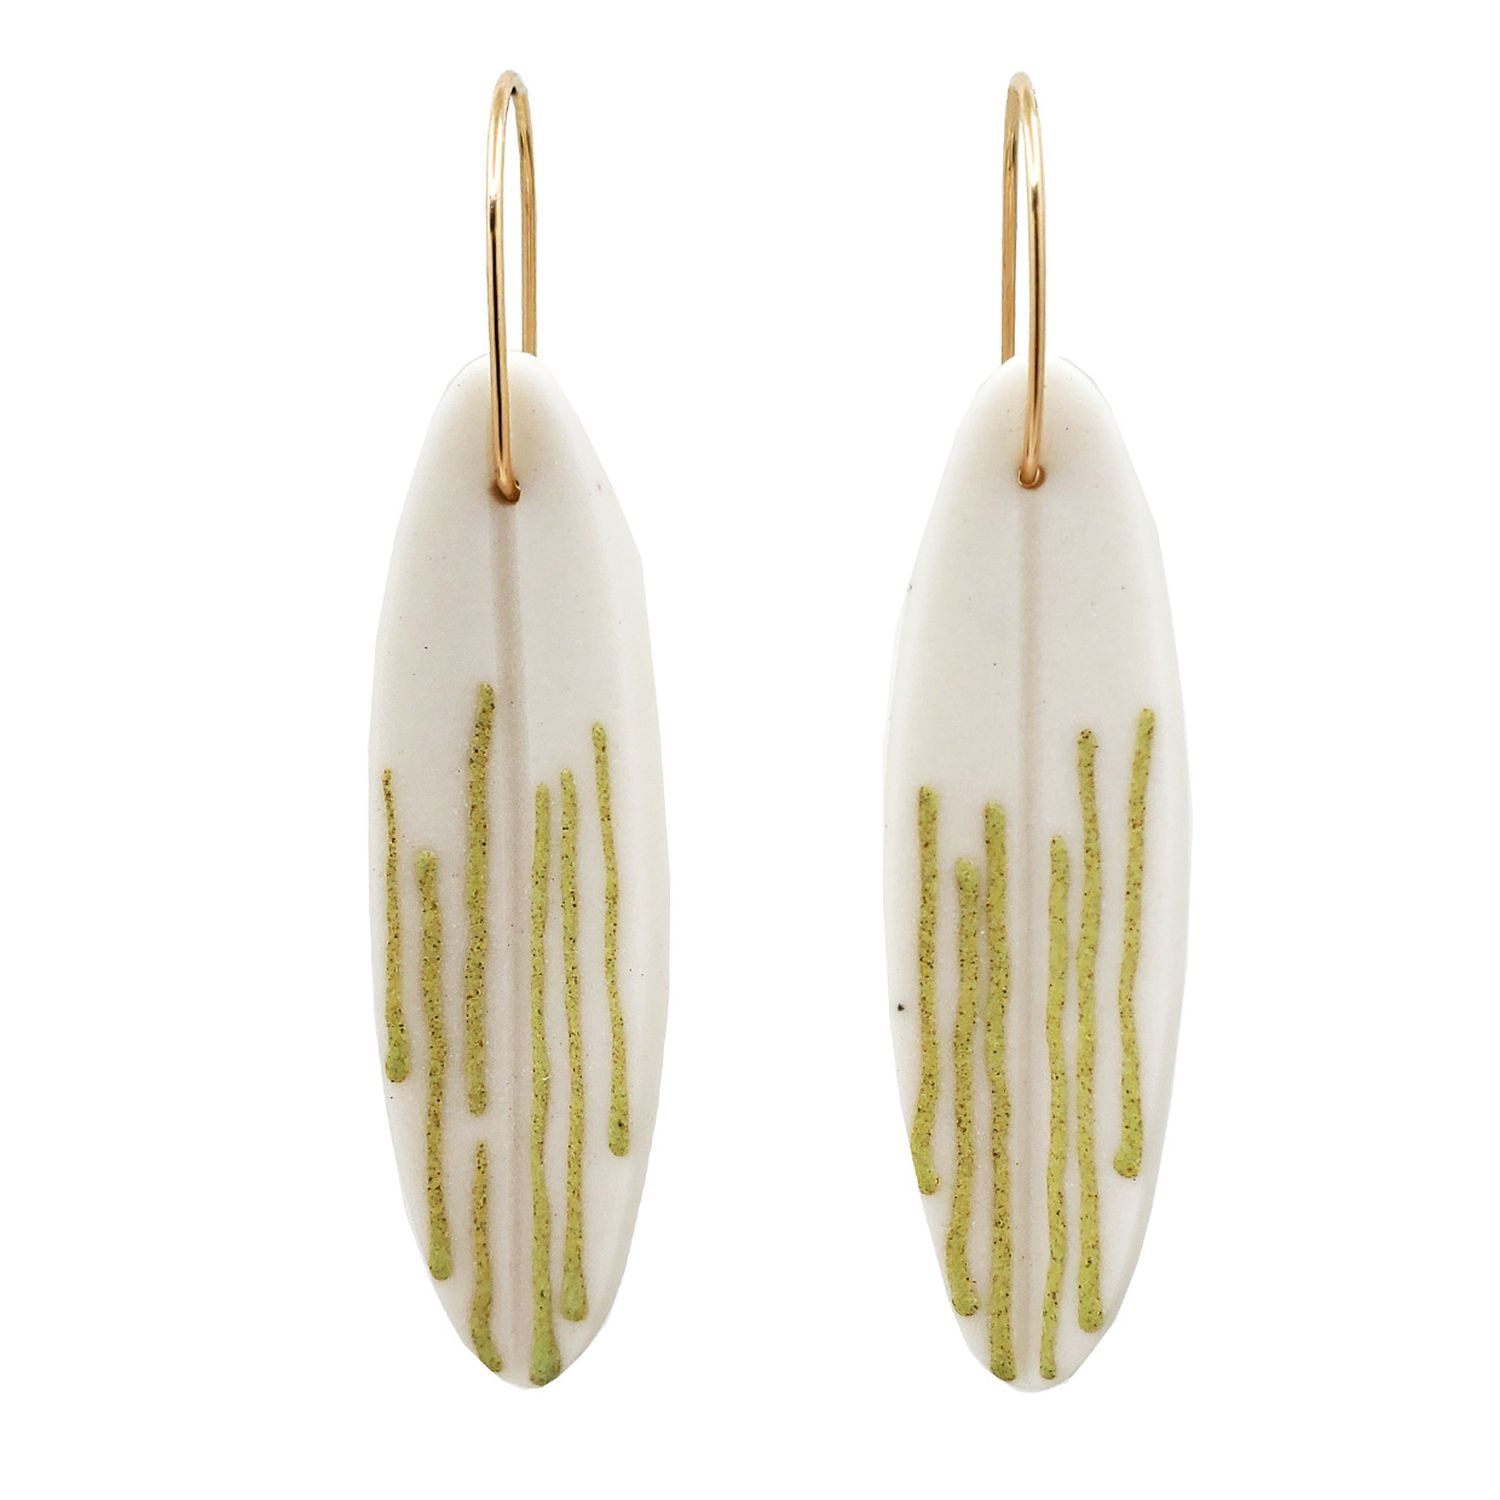 Chayle Jewellery: Large Willow Earrings – Porcelain & Gold Filled Product Image 1 of 1